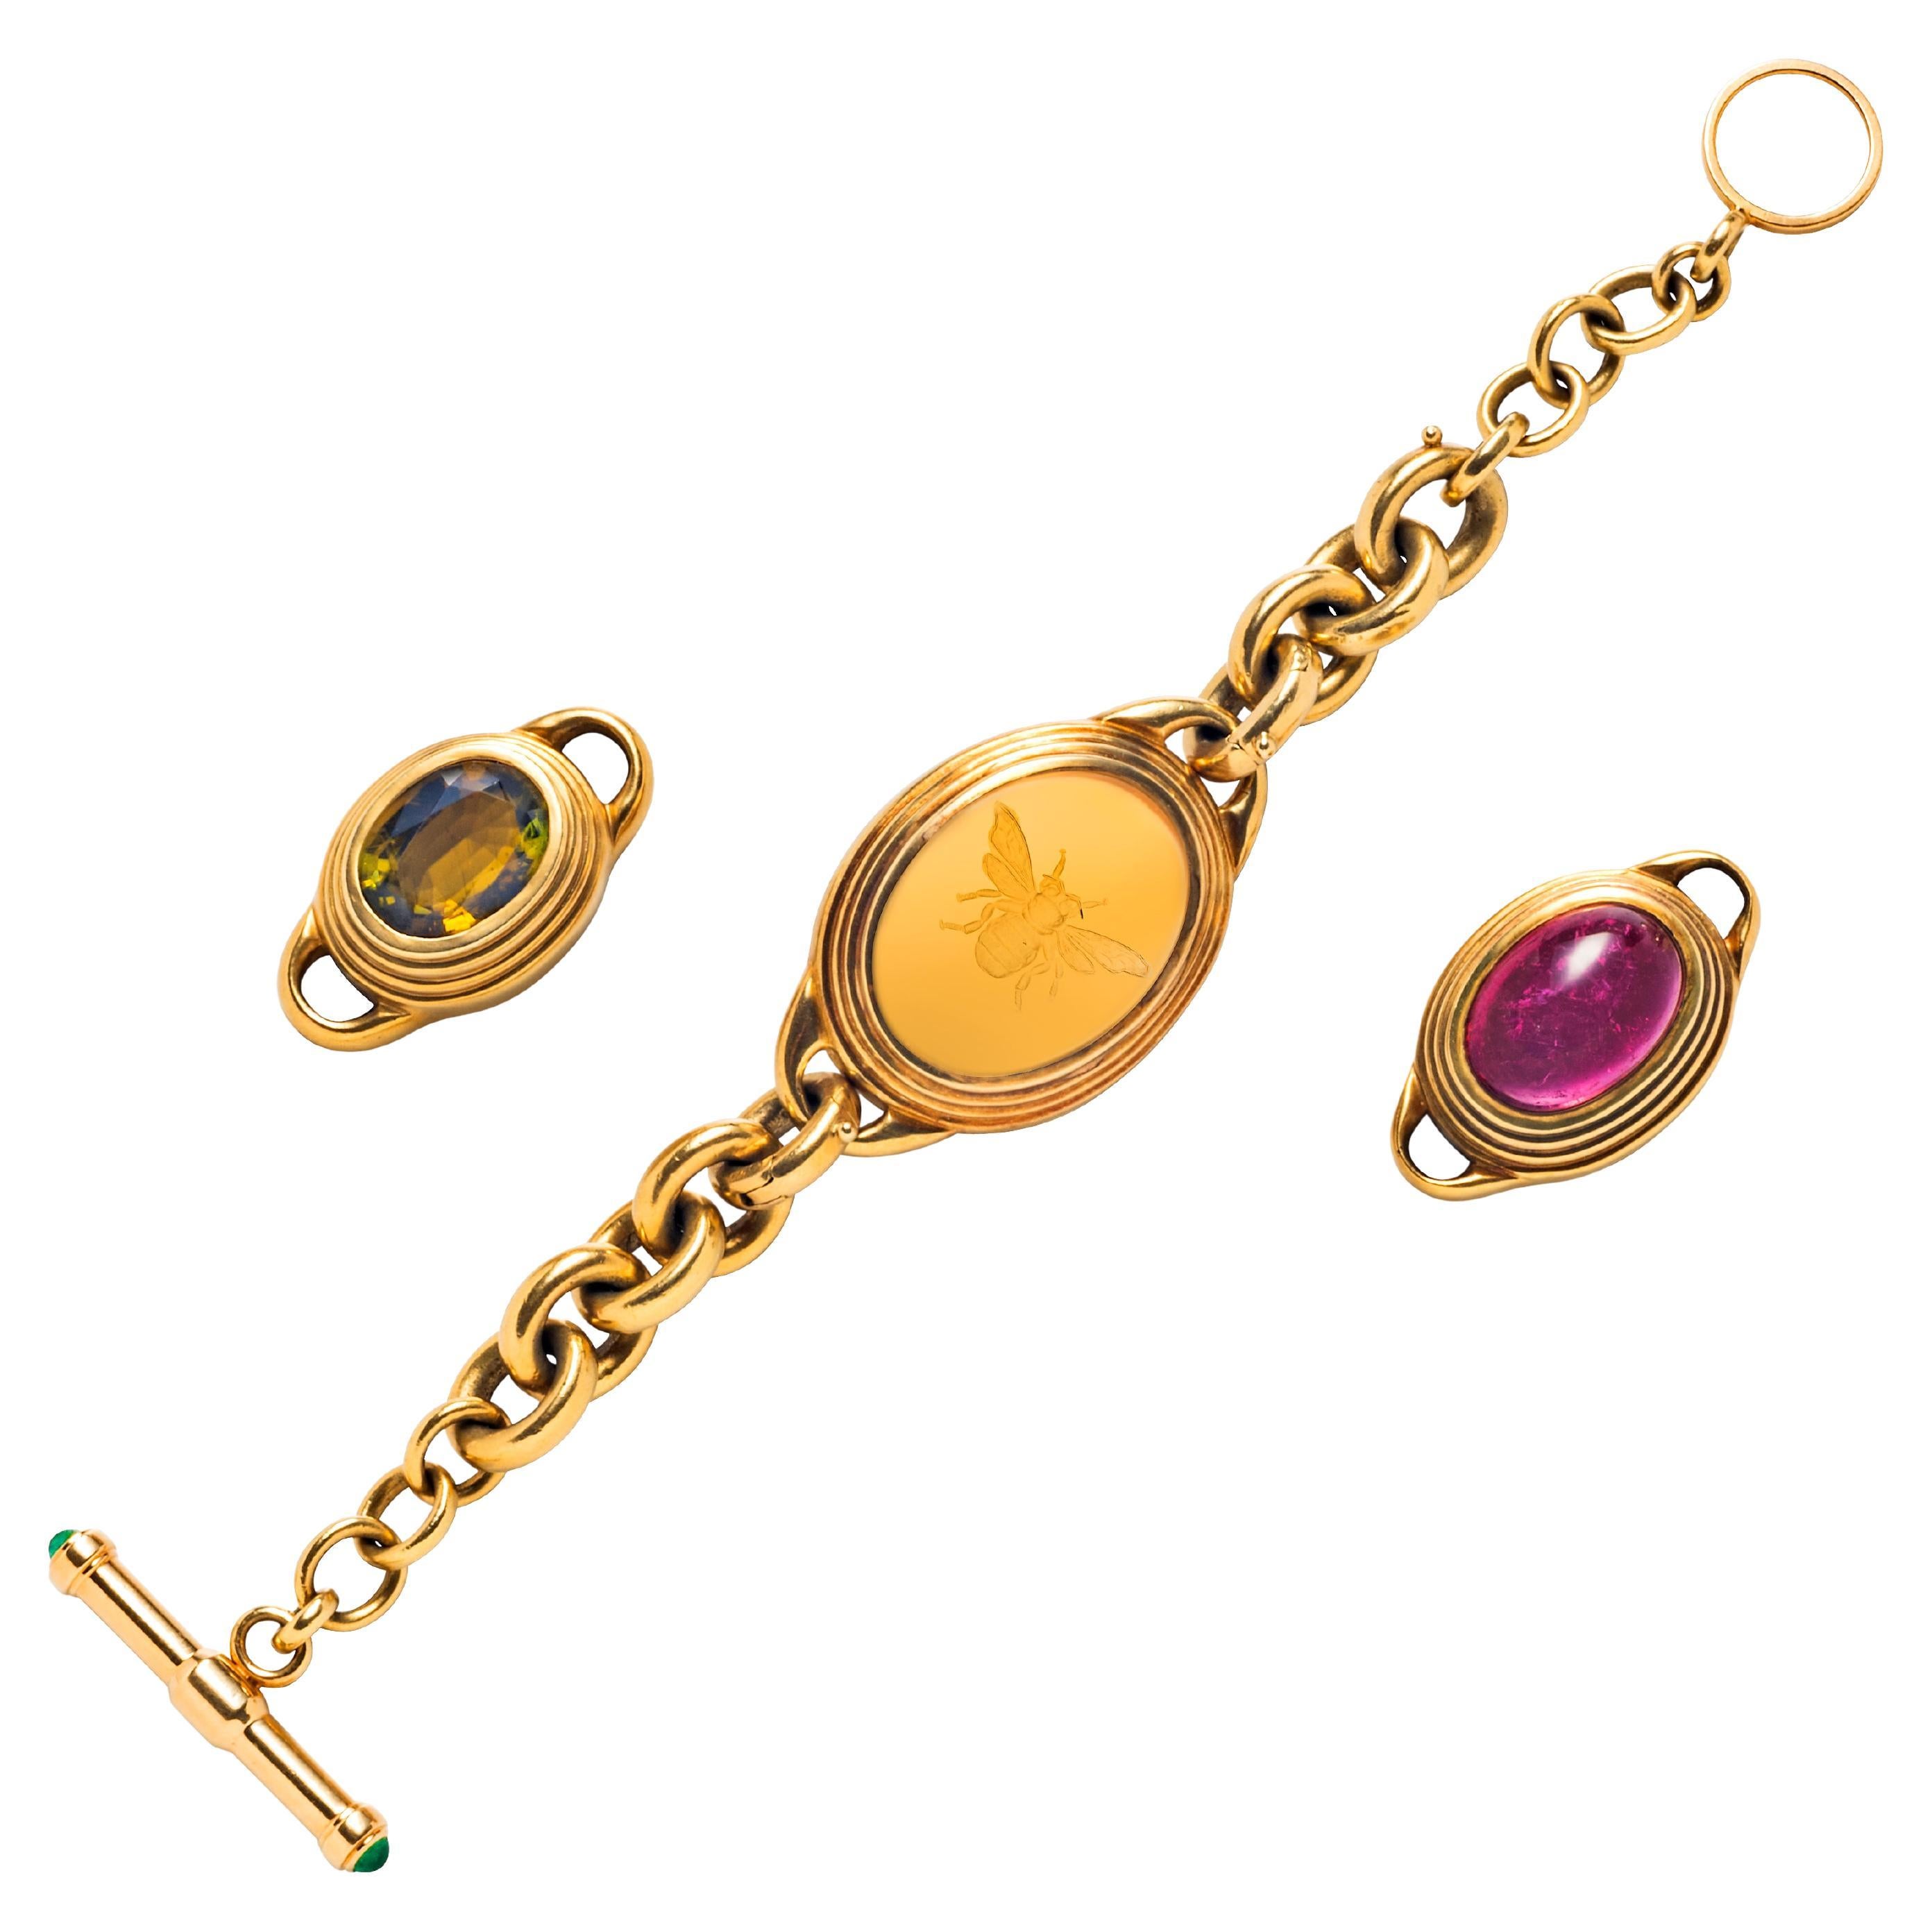 18k Gold Curb Link Bracelet with Interchangeable Citrine and Tourmaline Center